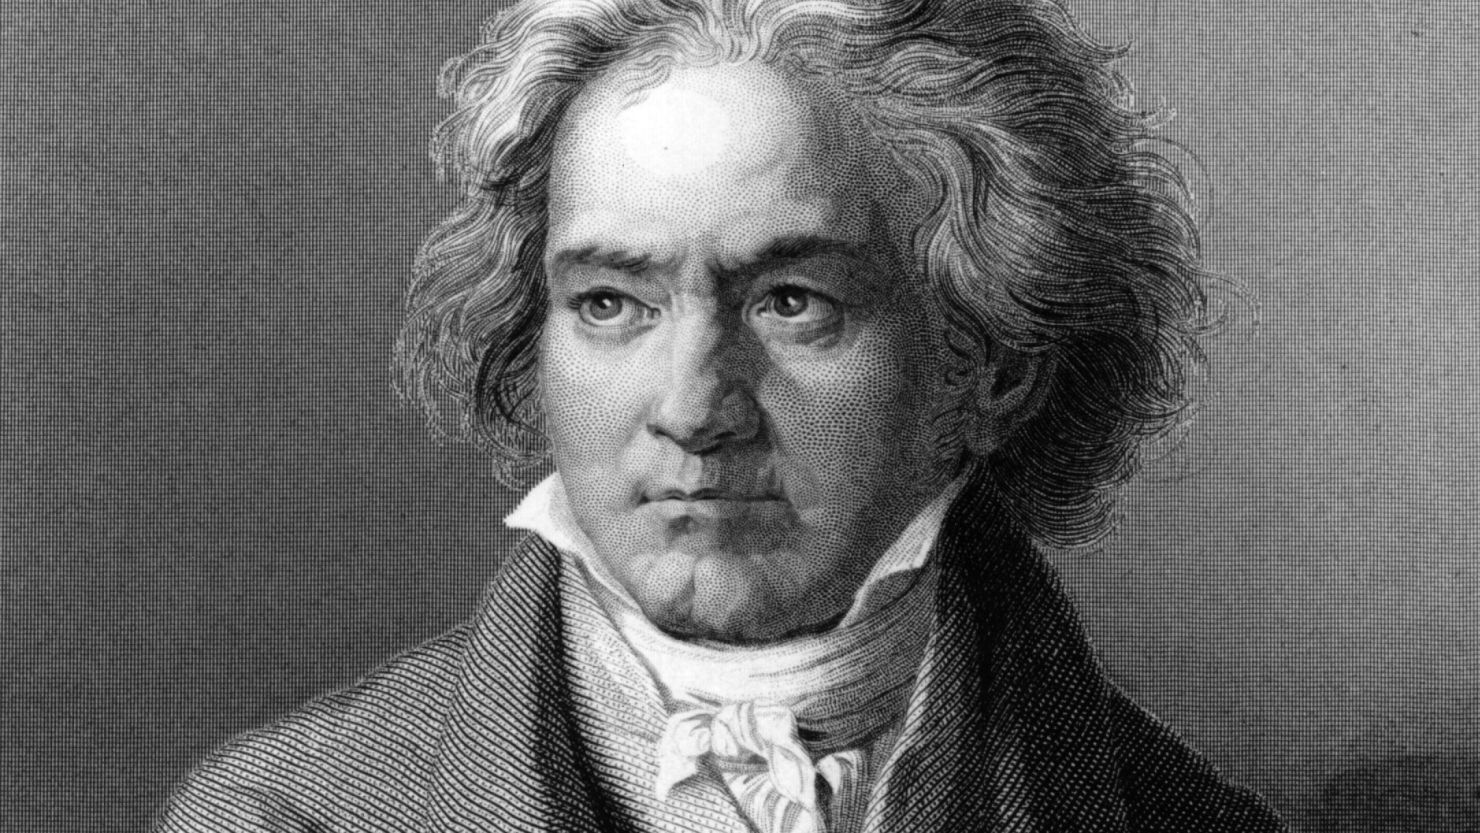 German composer and pianist Ludwig van Beethoven lived from 1770 to 1827.